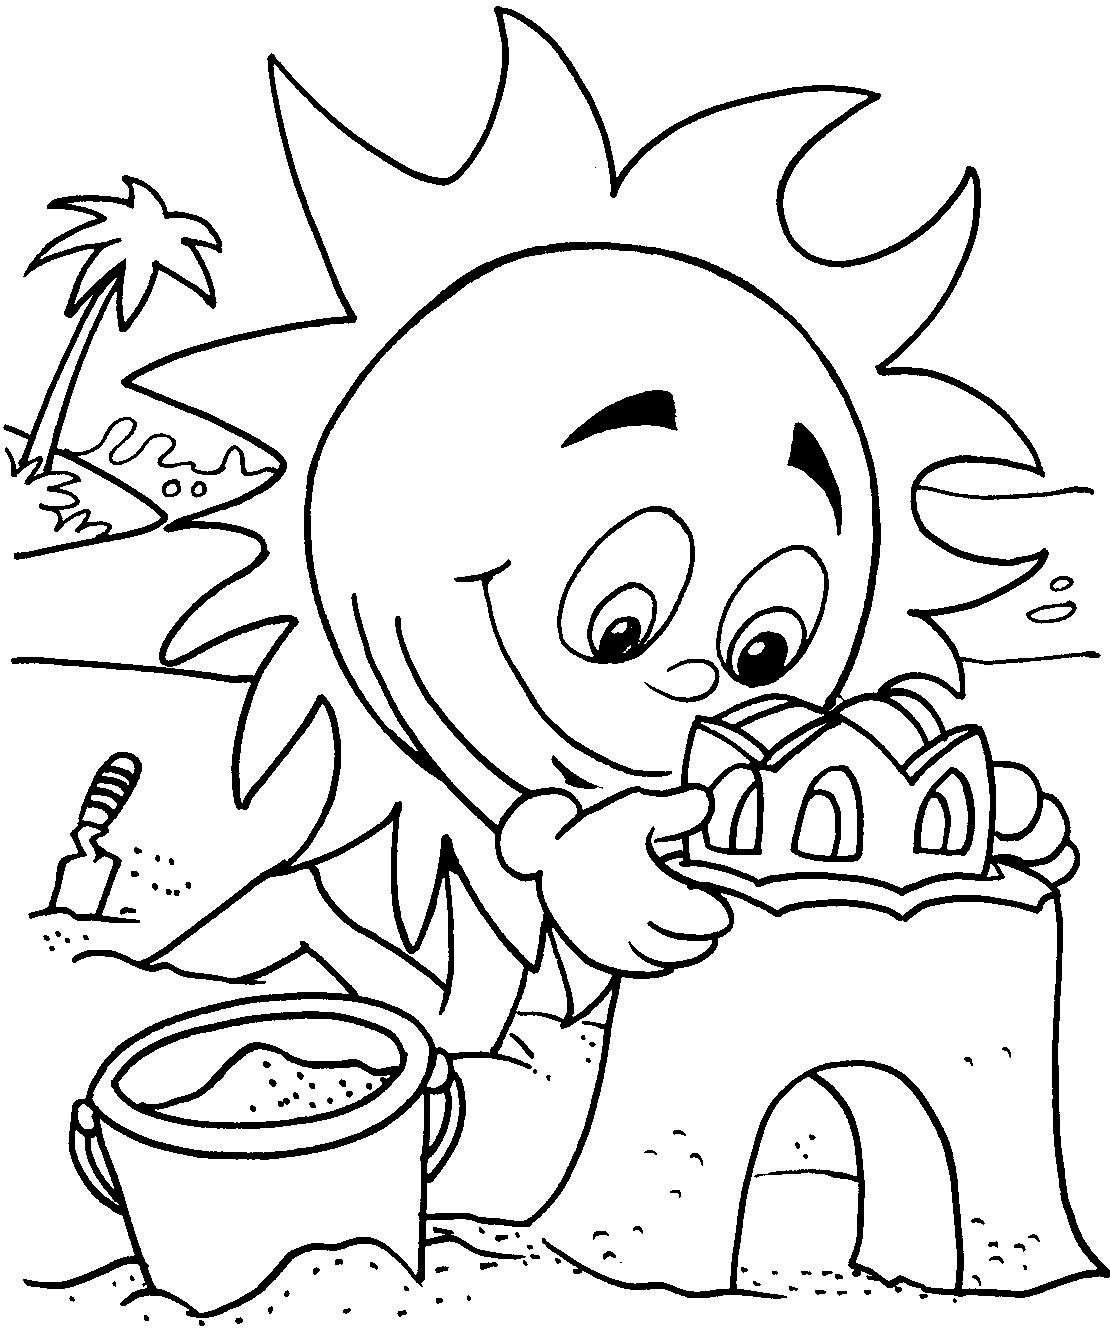 Summer Coloring Sheets For Kids
 Summer Coloring Pages 5